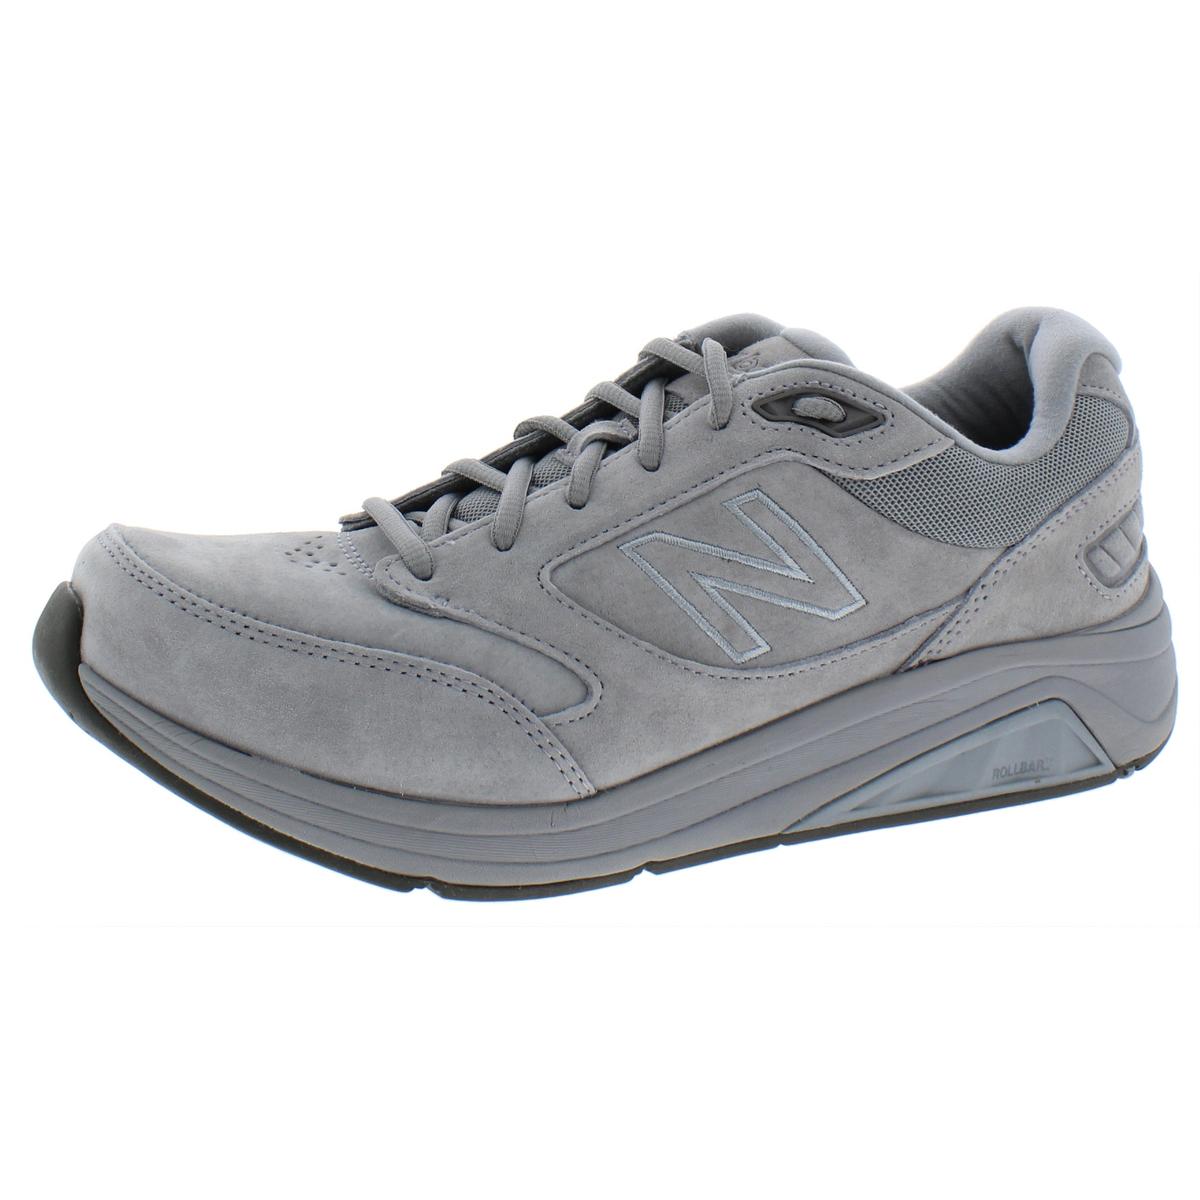 New Balance 928V3 Mens Suede Performance Walking Shoes